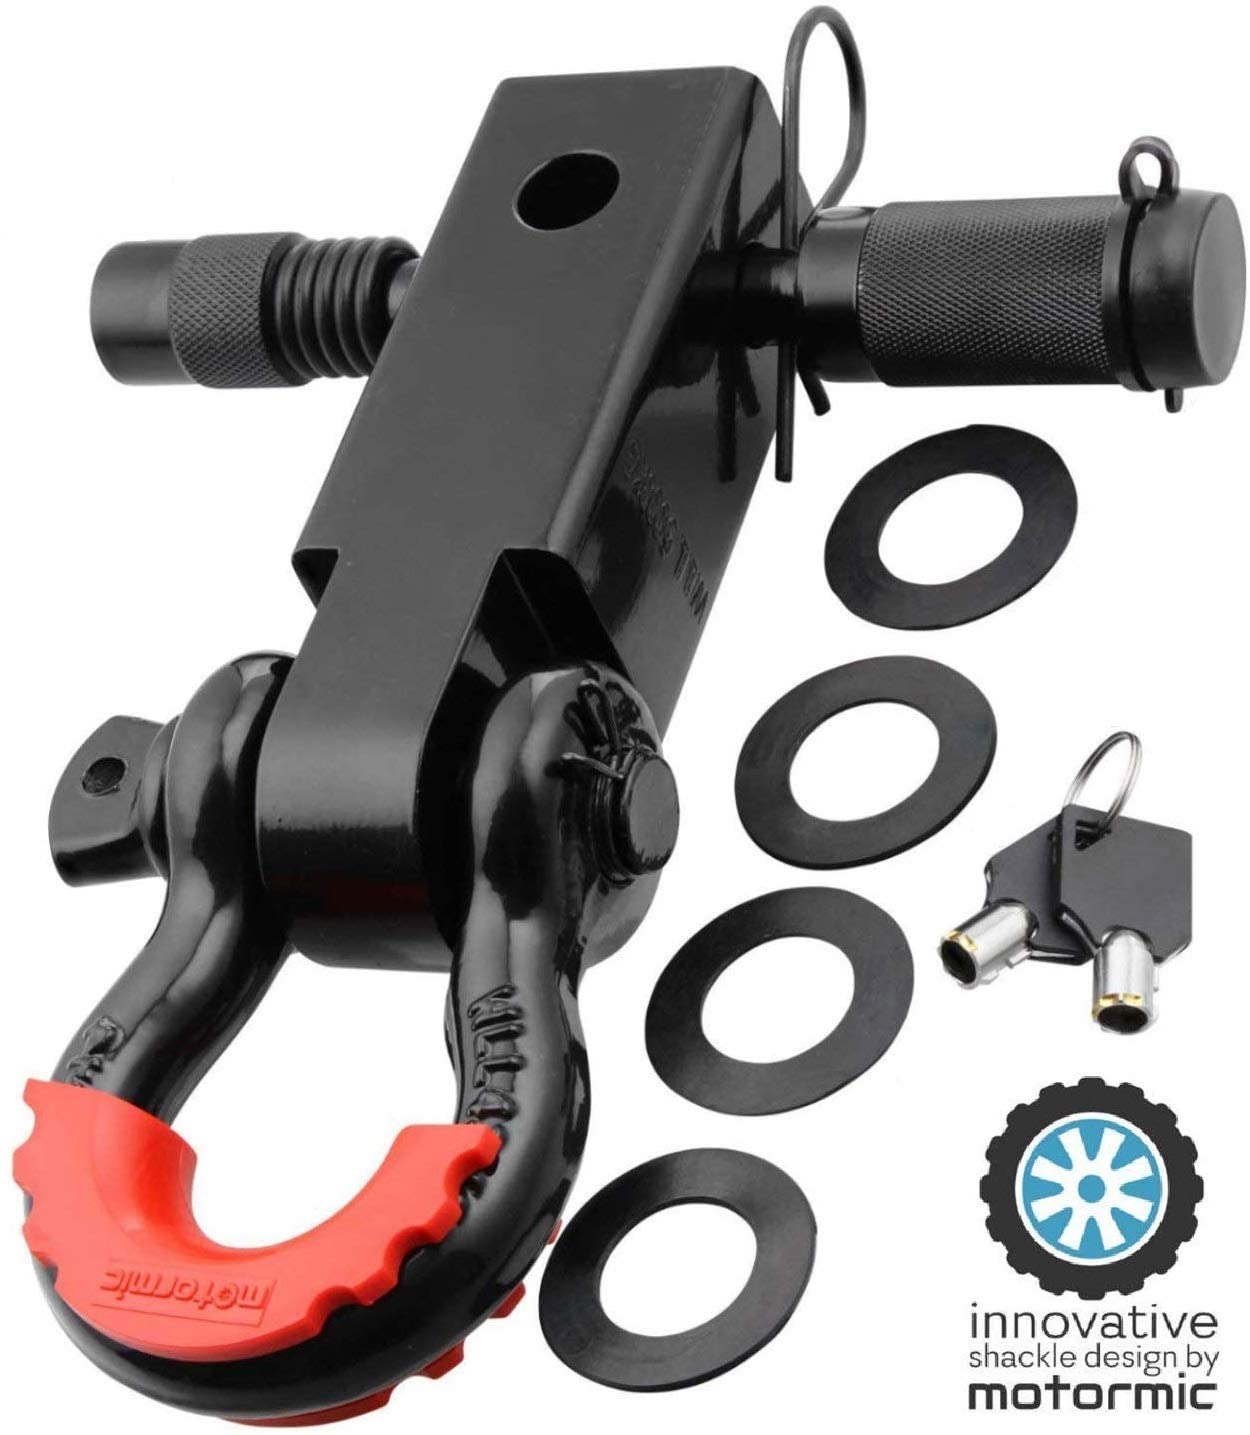 motormic Unique Shackle Hitch Receiver 2” (35,000 lbs Max Capacity) with 3/4